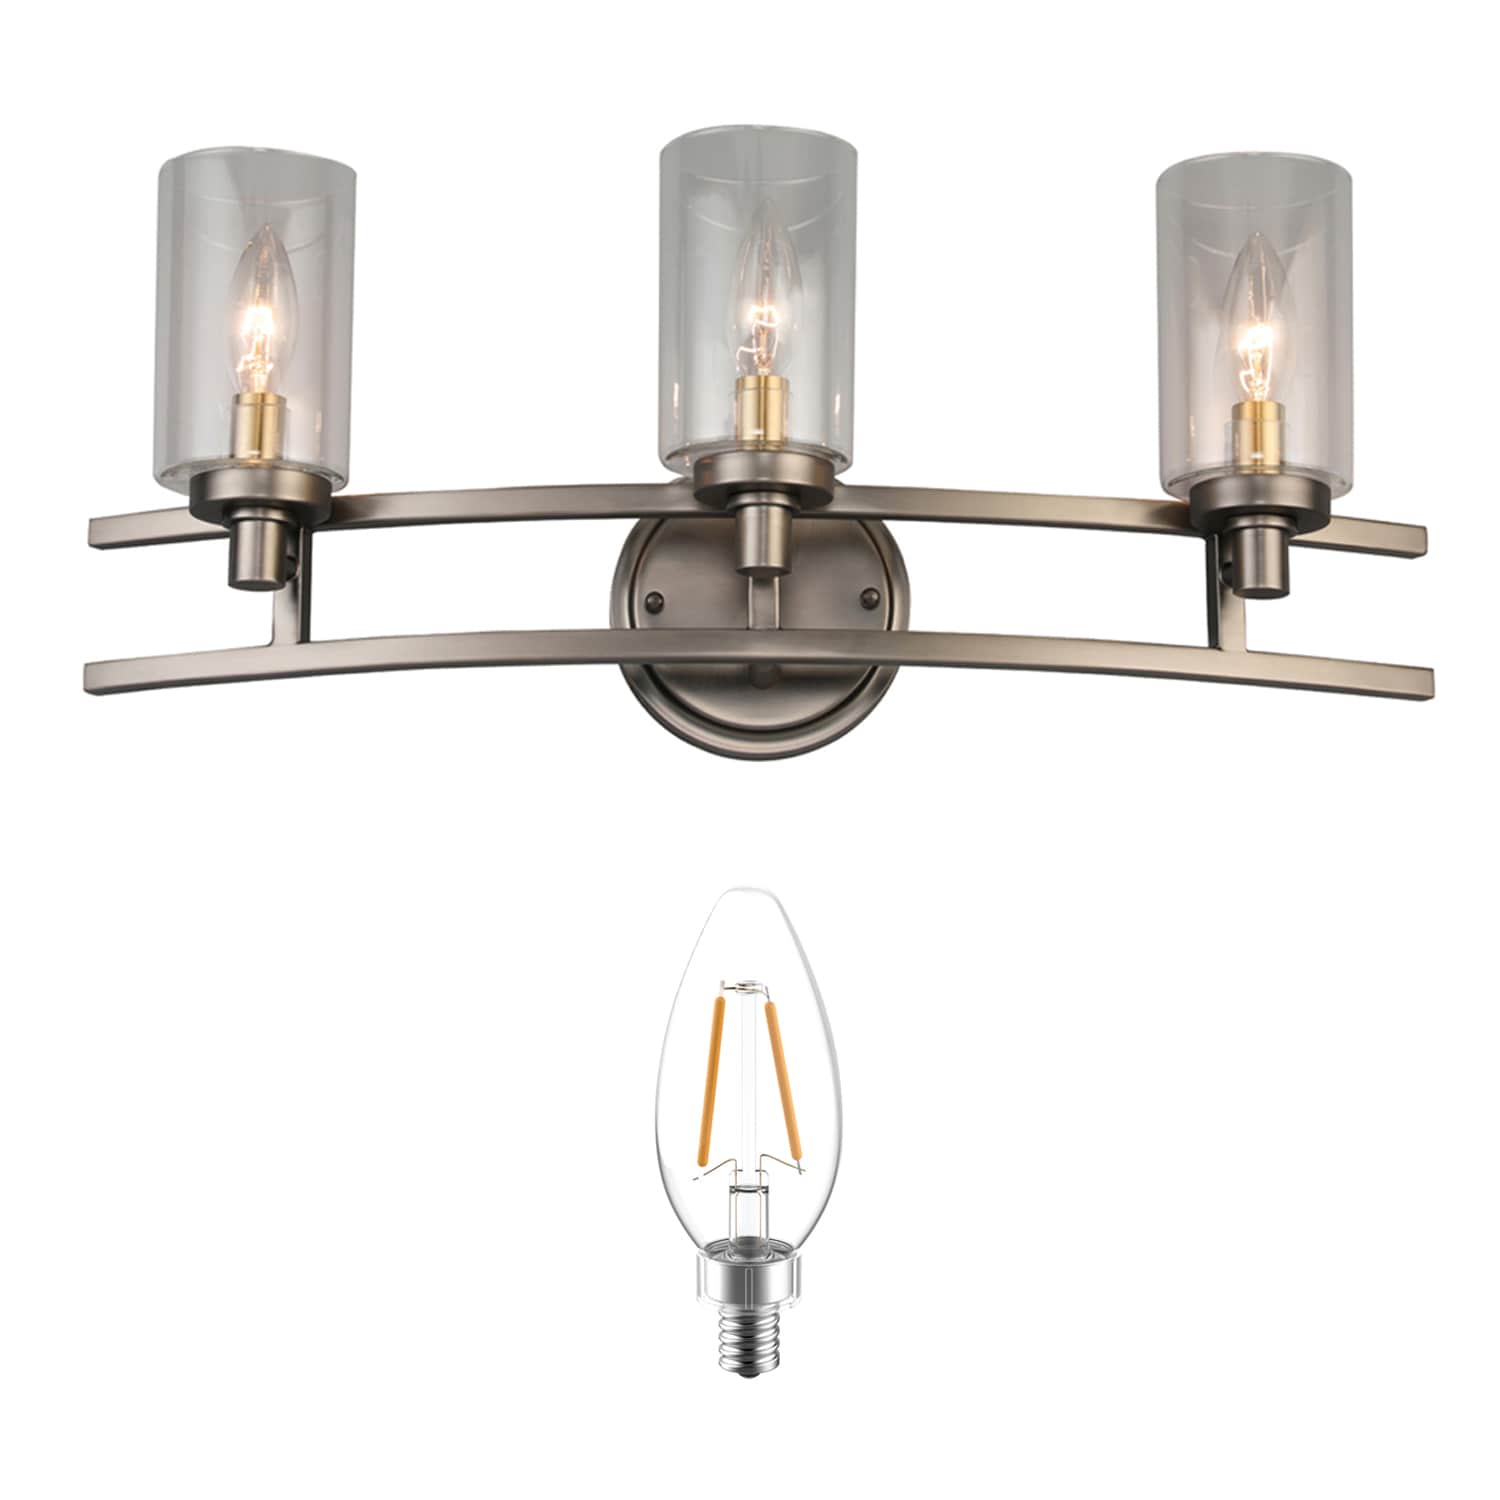 allen + roth Charlotte 22-in 3-Light Raw Iron Rustic Vanity Light Collection